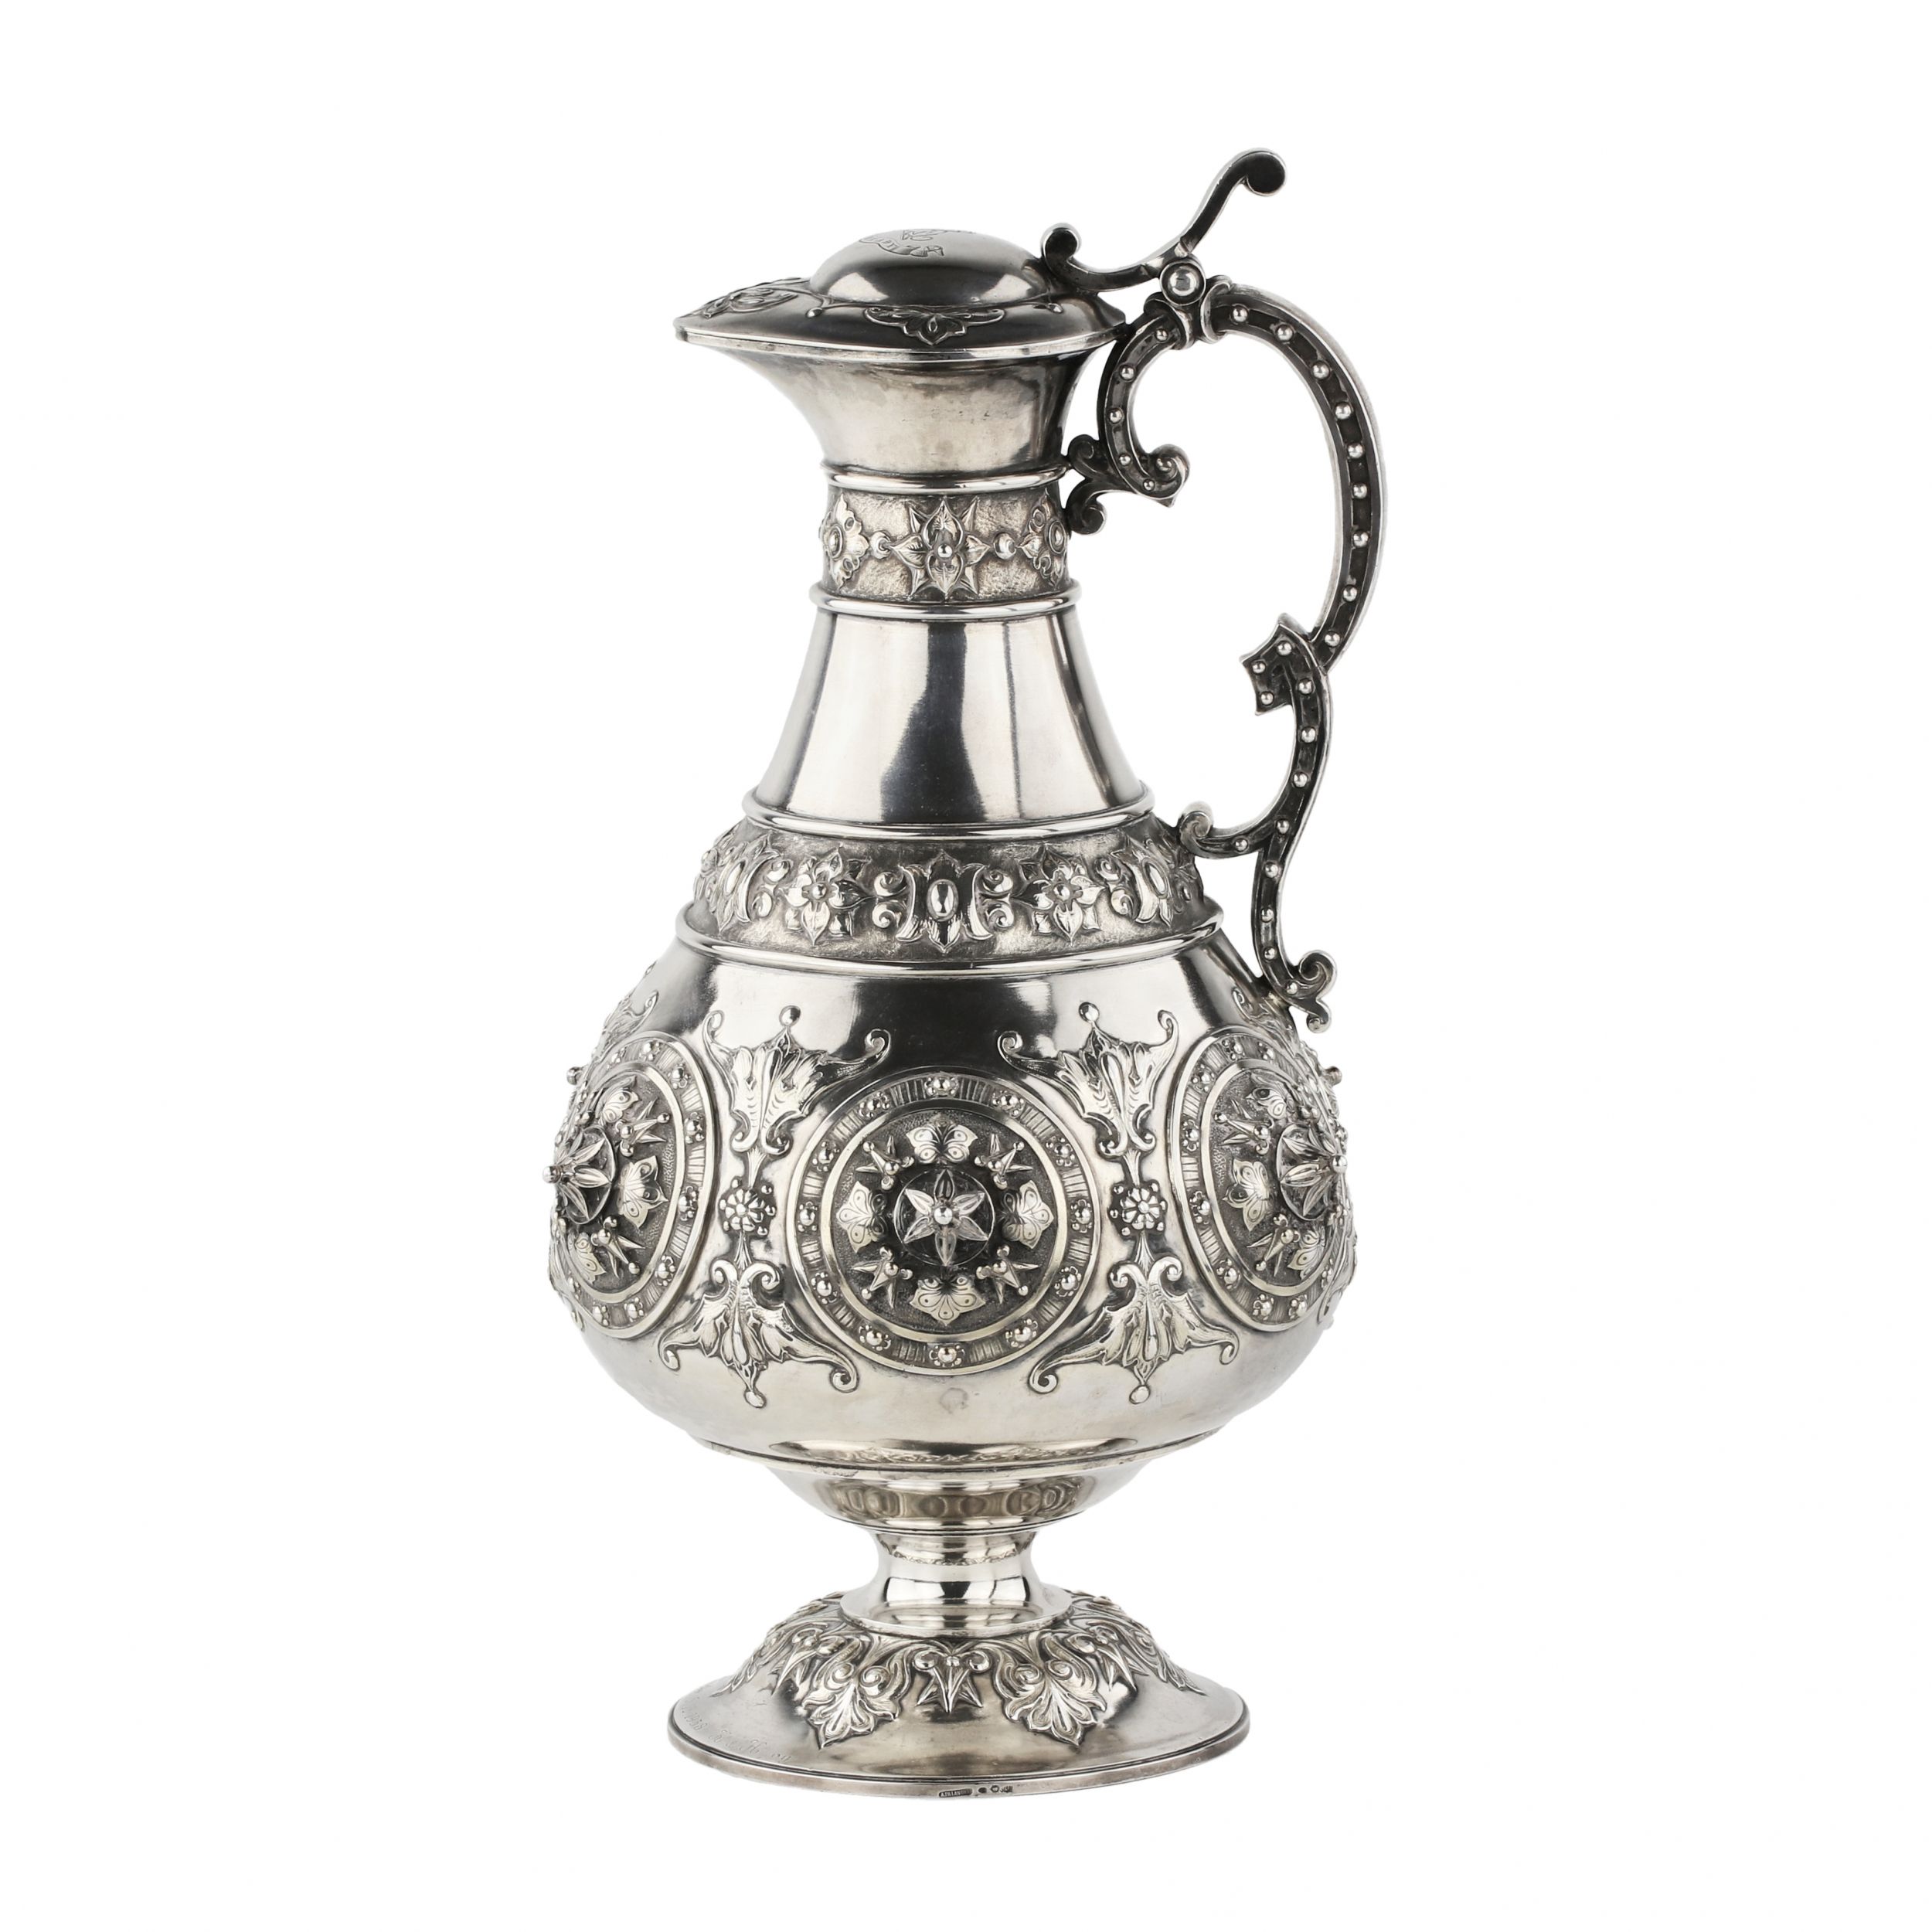 WINE-JUG-in-silver-James-Barclay-Hennell-London-1877-